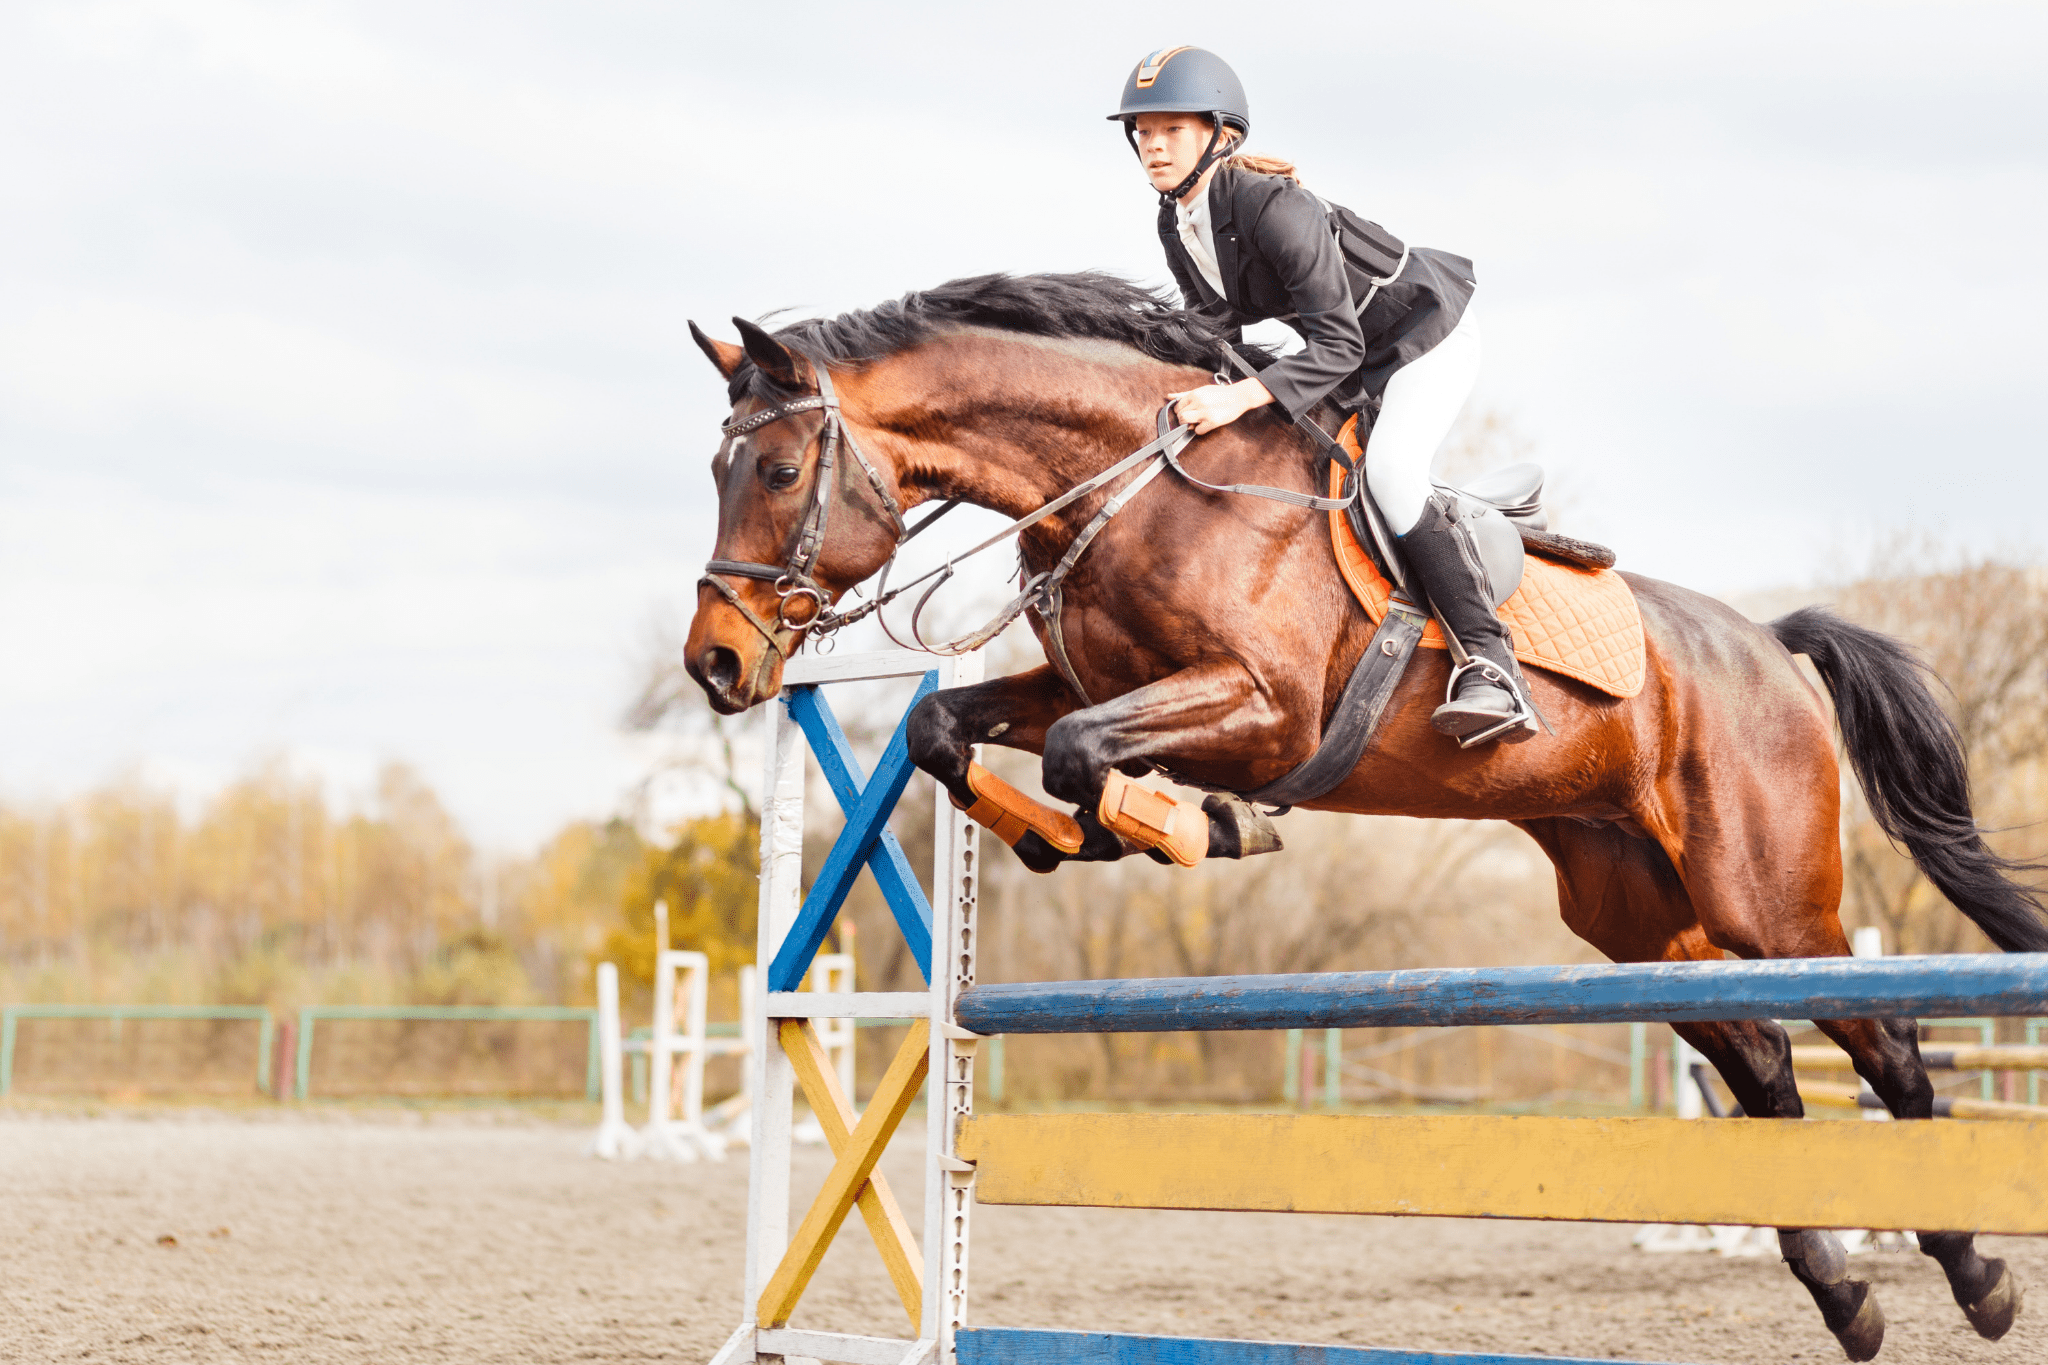 11 Best Horse Breeds for Jumping Big and Clear